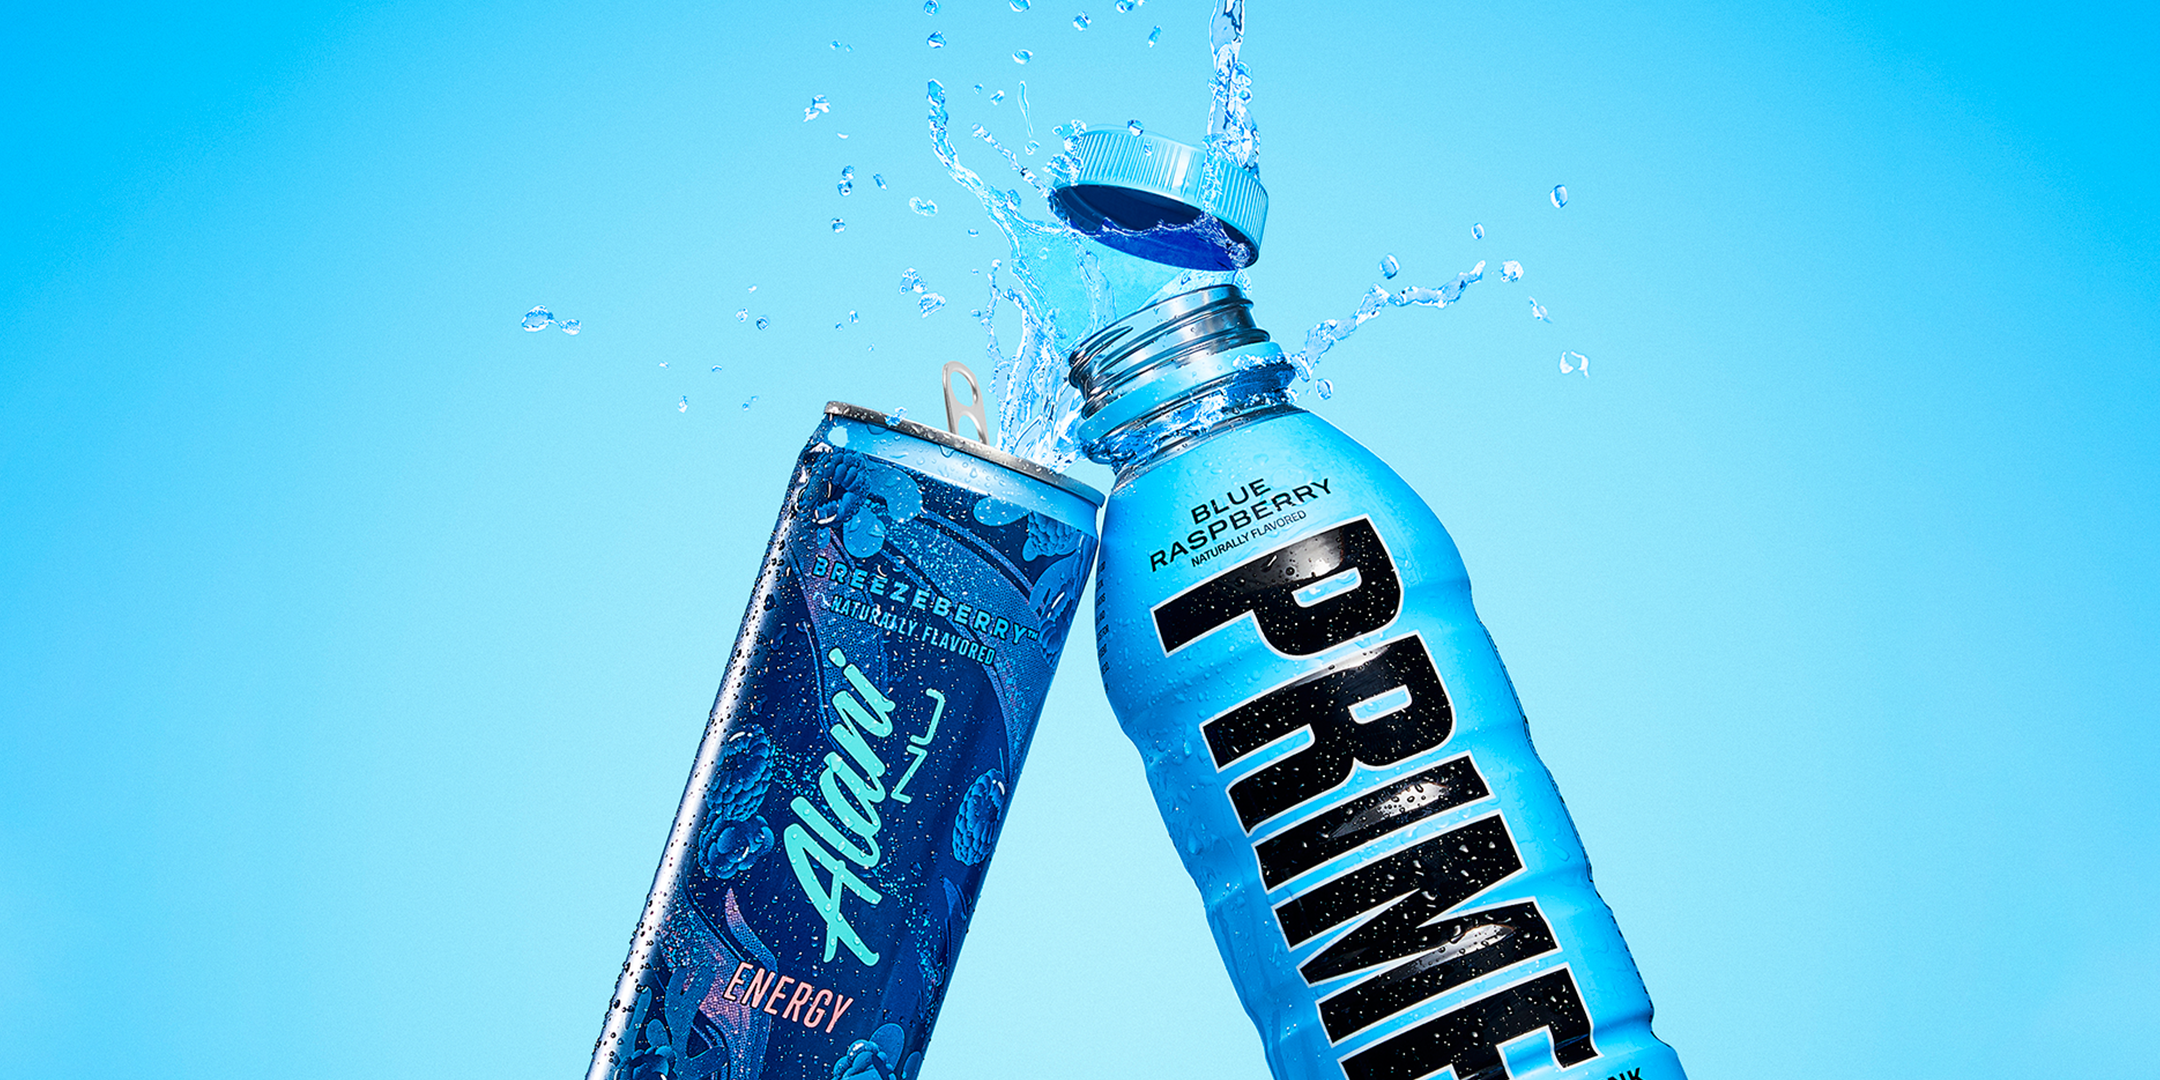 An energy drink in blue raspberry flavor splashing out of an open bottle next to a prime hydration bottle in blue raspberry flavor.